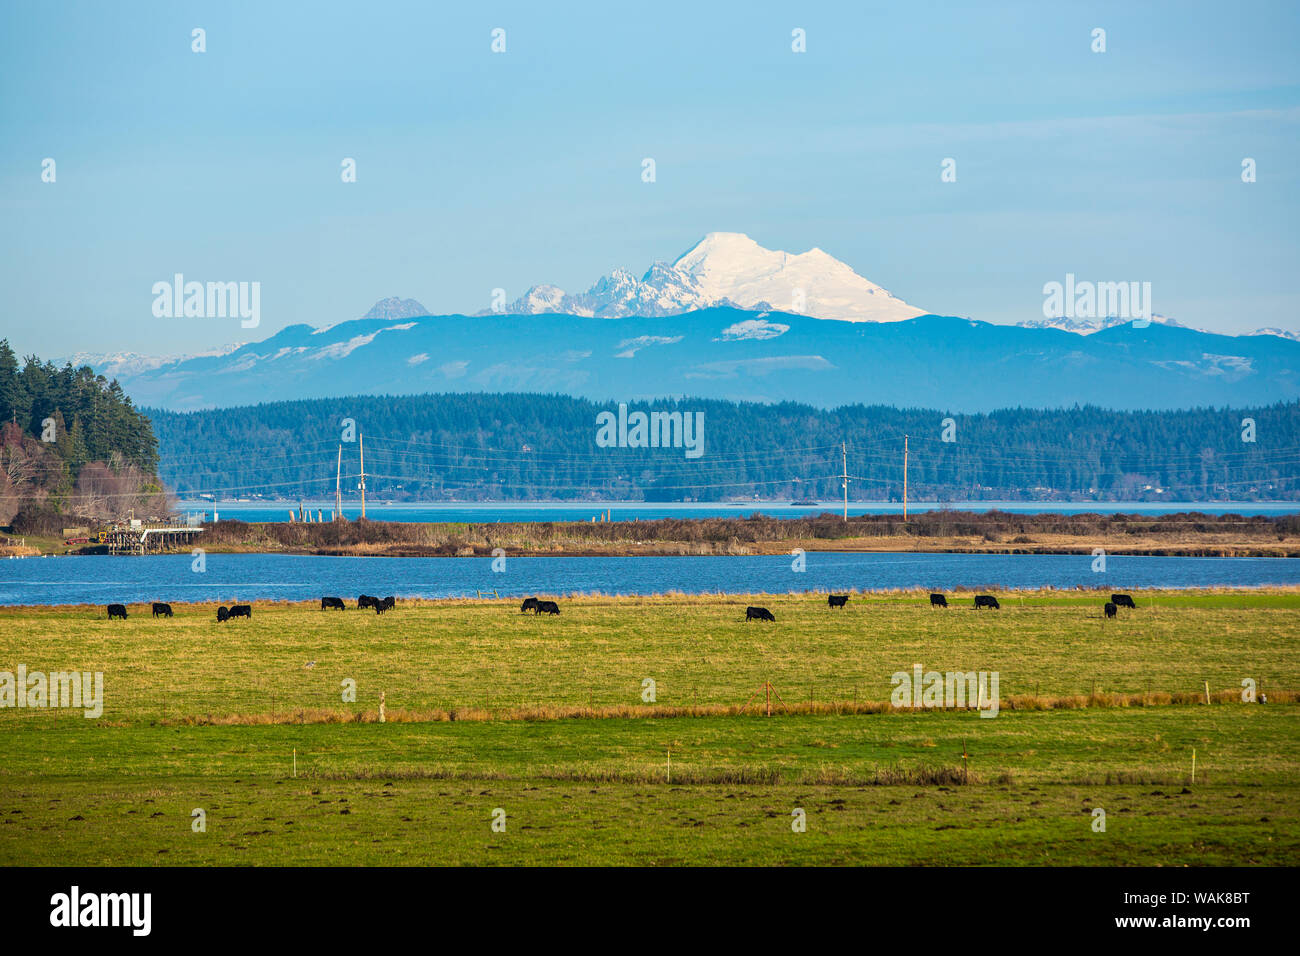 Whidbey Island, Washington State. Snowcapped Mount Baker, the Puget Sound, black cows and a pasture Stock Photo